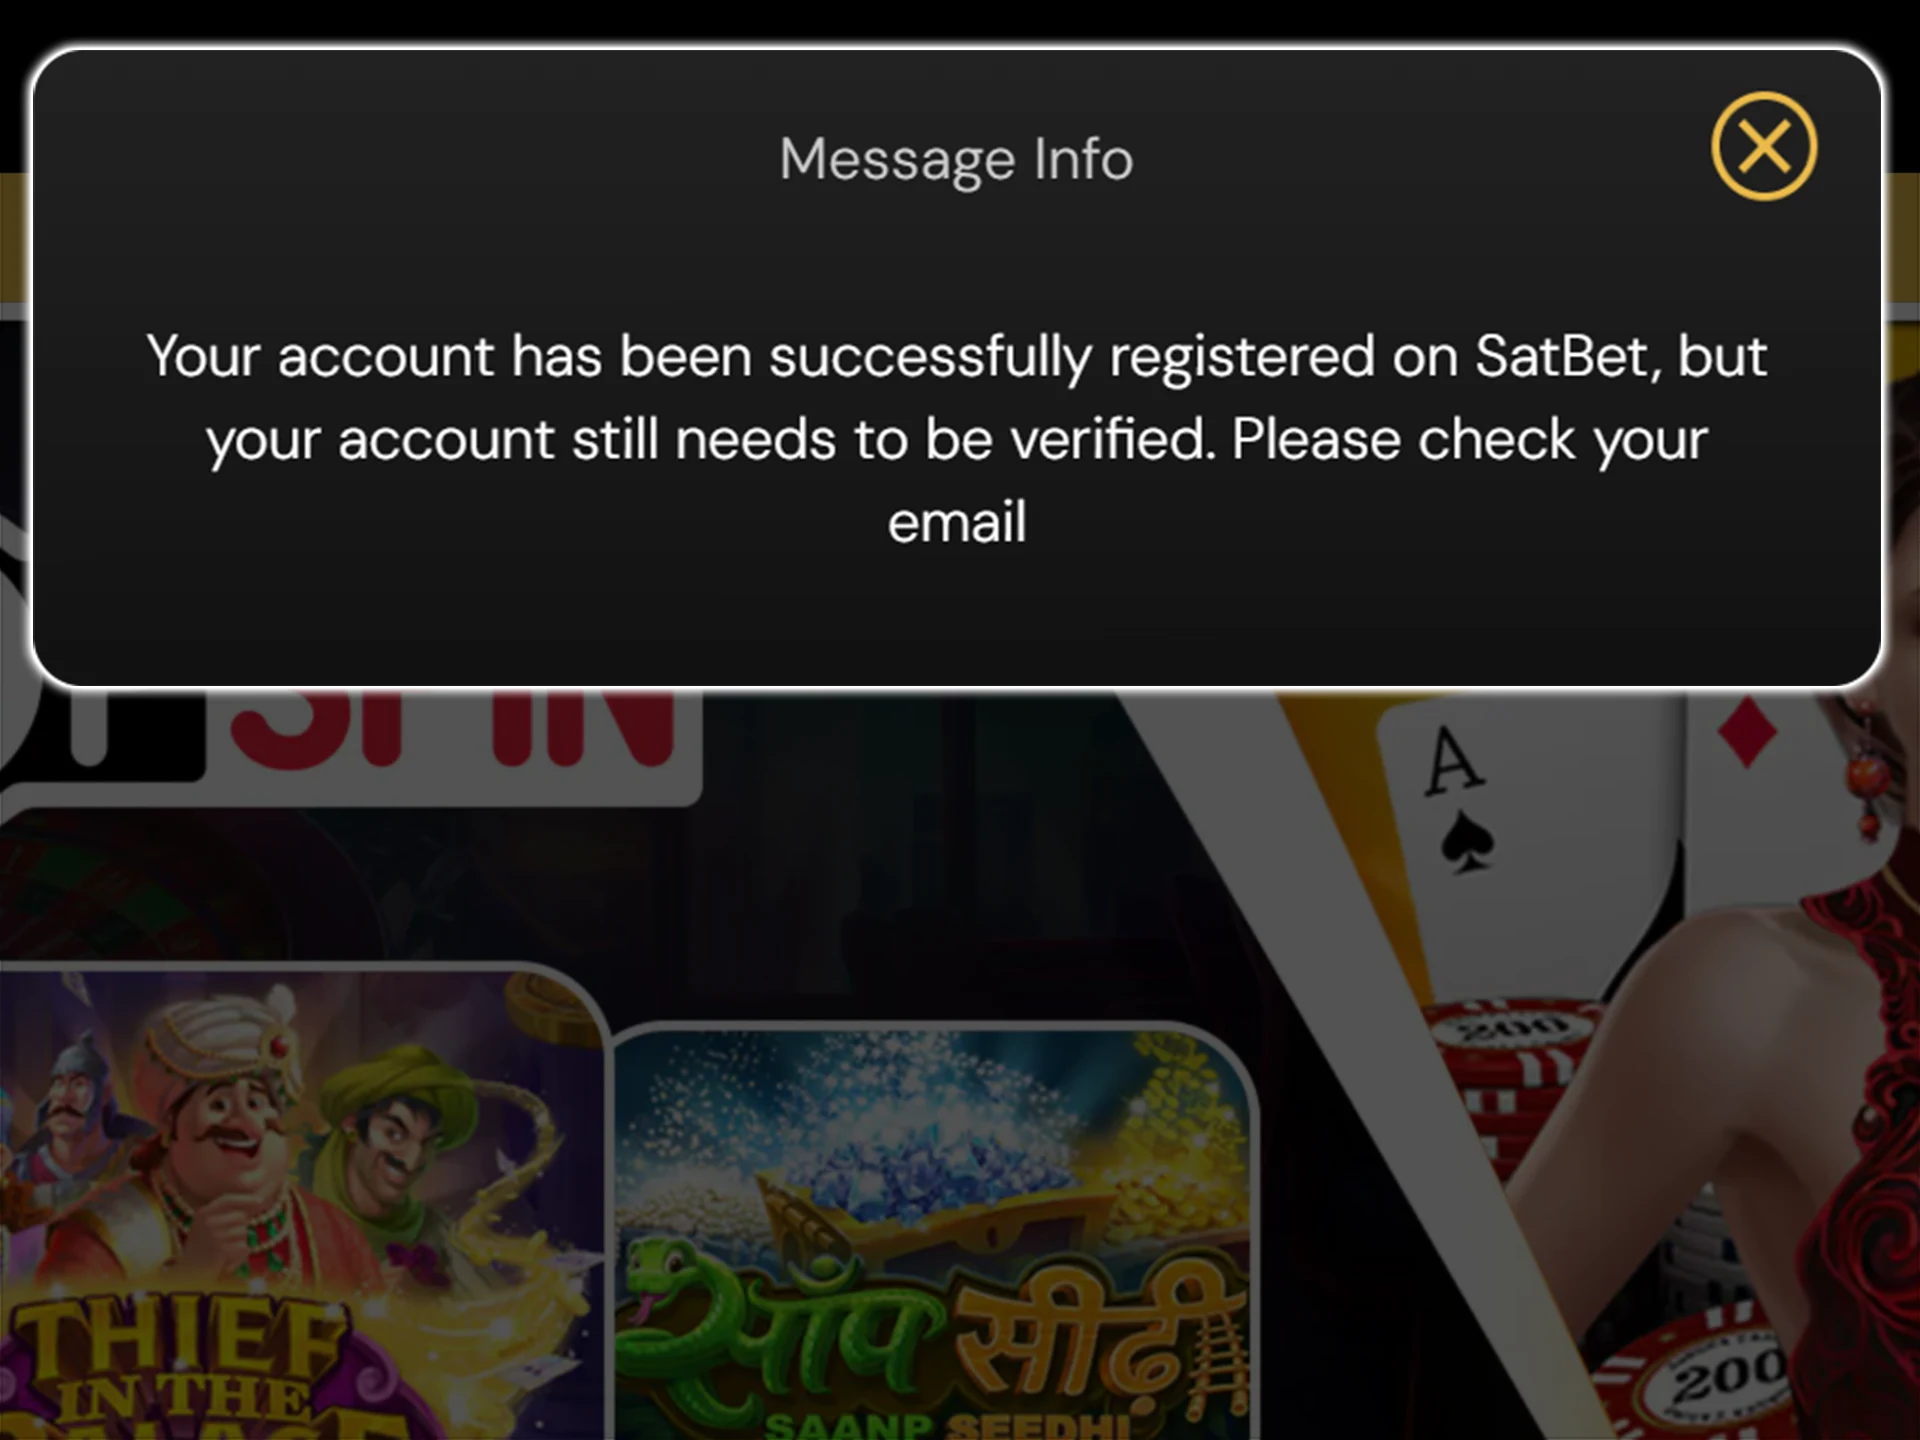 Check your email and complete the verification of your Satbet account.